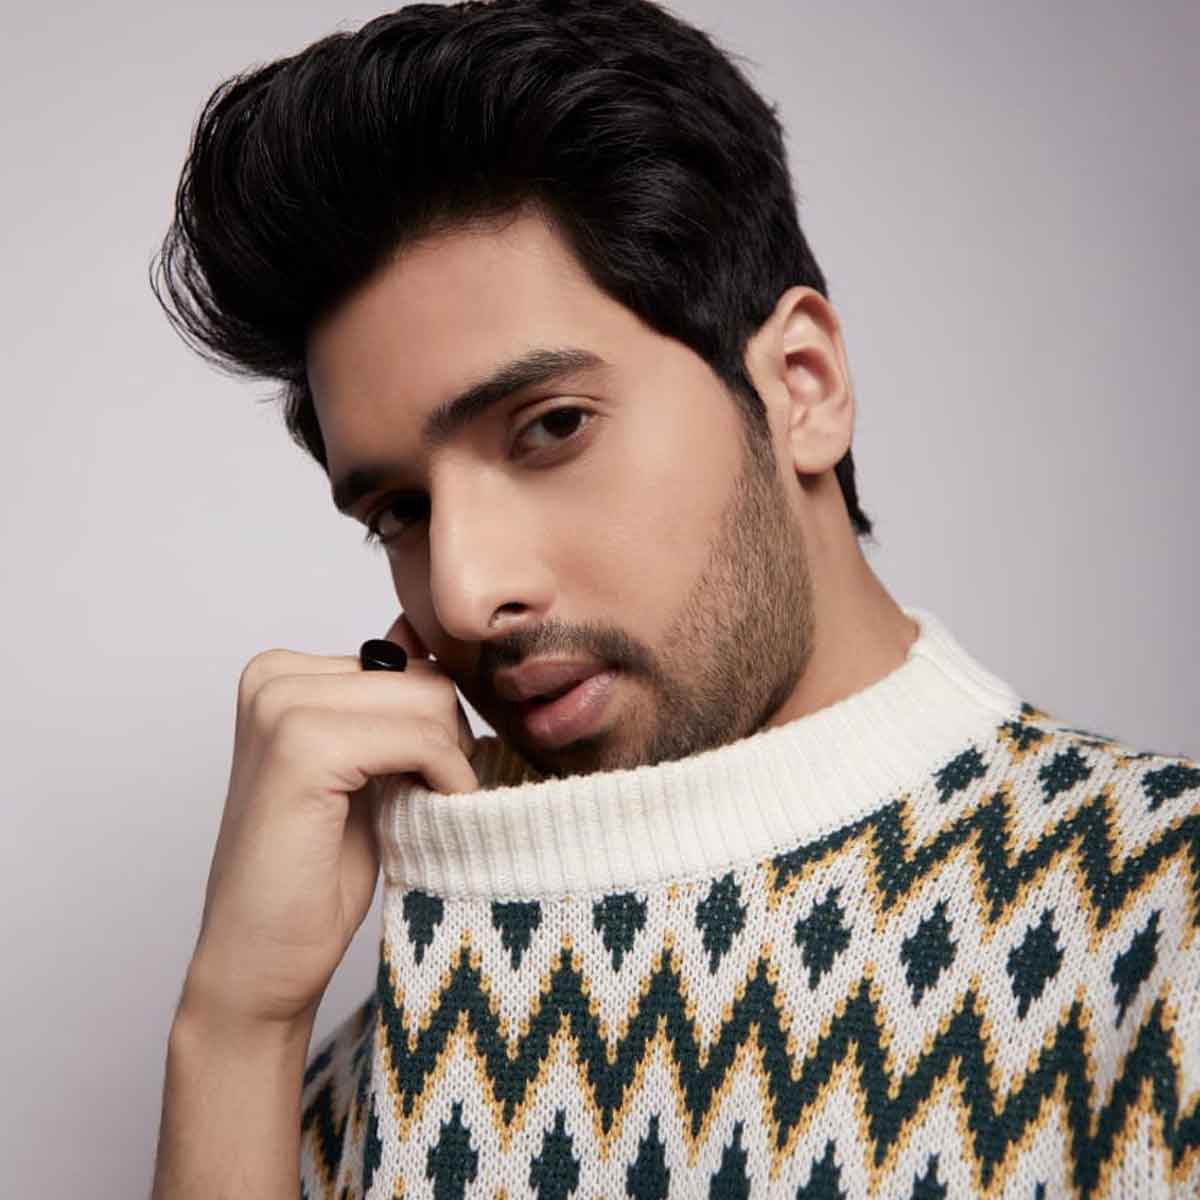 EXCLUSIVE: Armaan Malik spills beans on his birthday plans amid pandemic; Overwhelmed with Echo's success